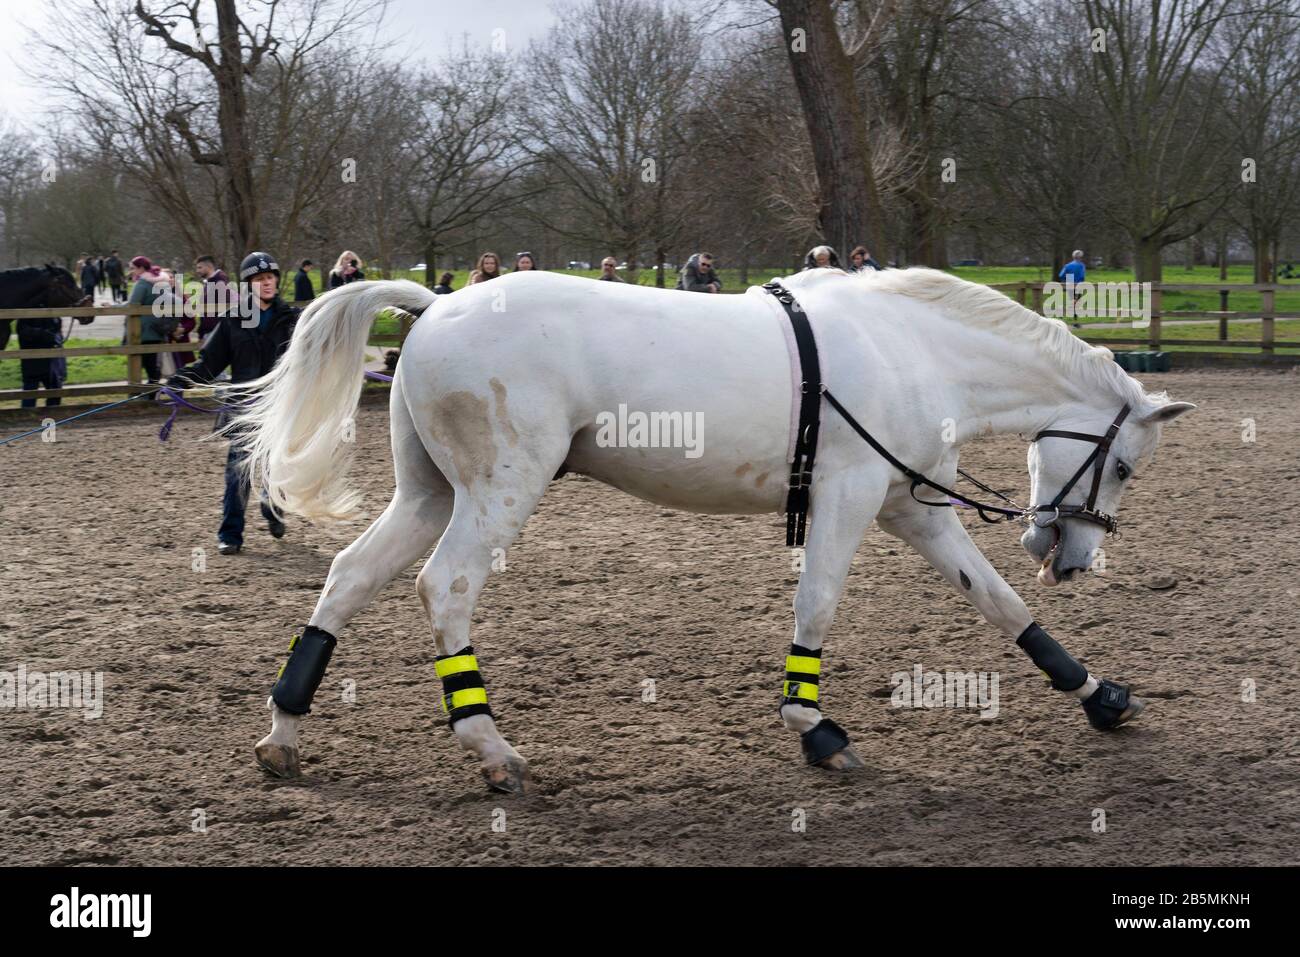 A police horse is being trained in Hyde Park,London Stock Photo